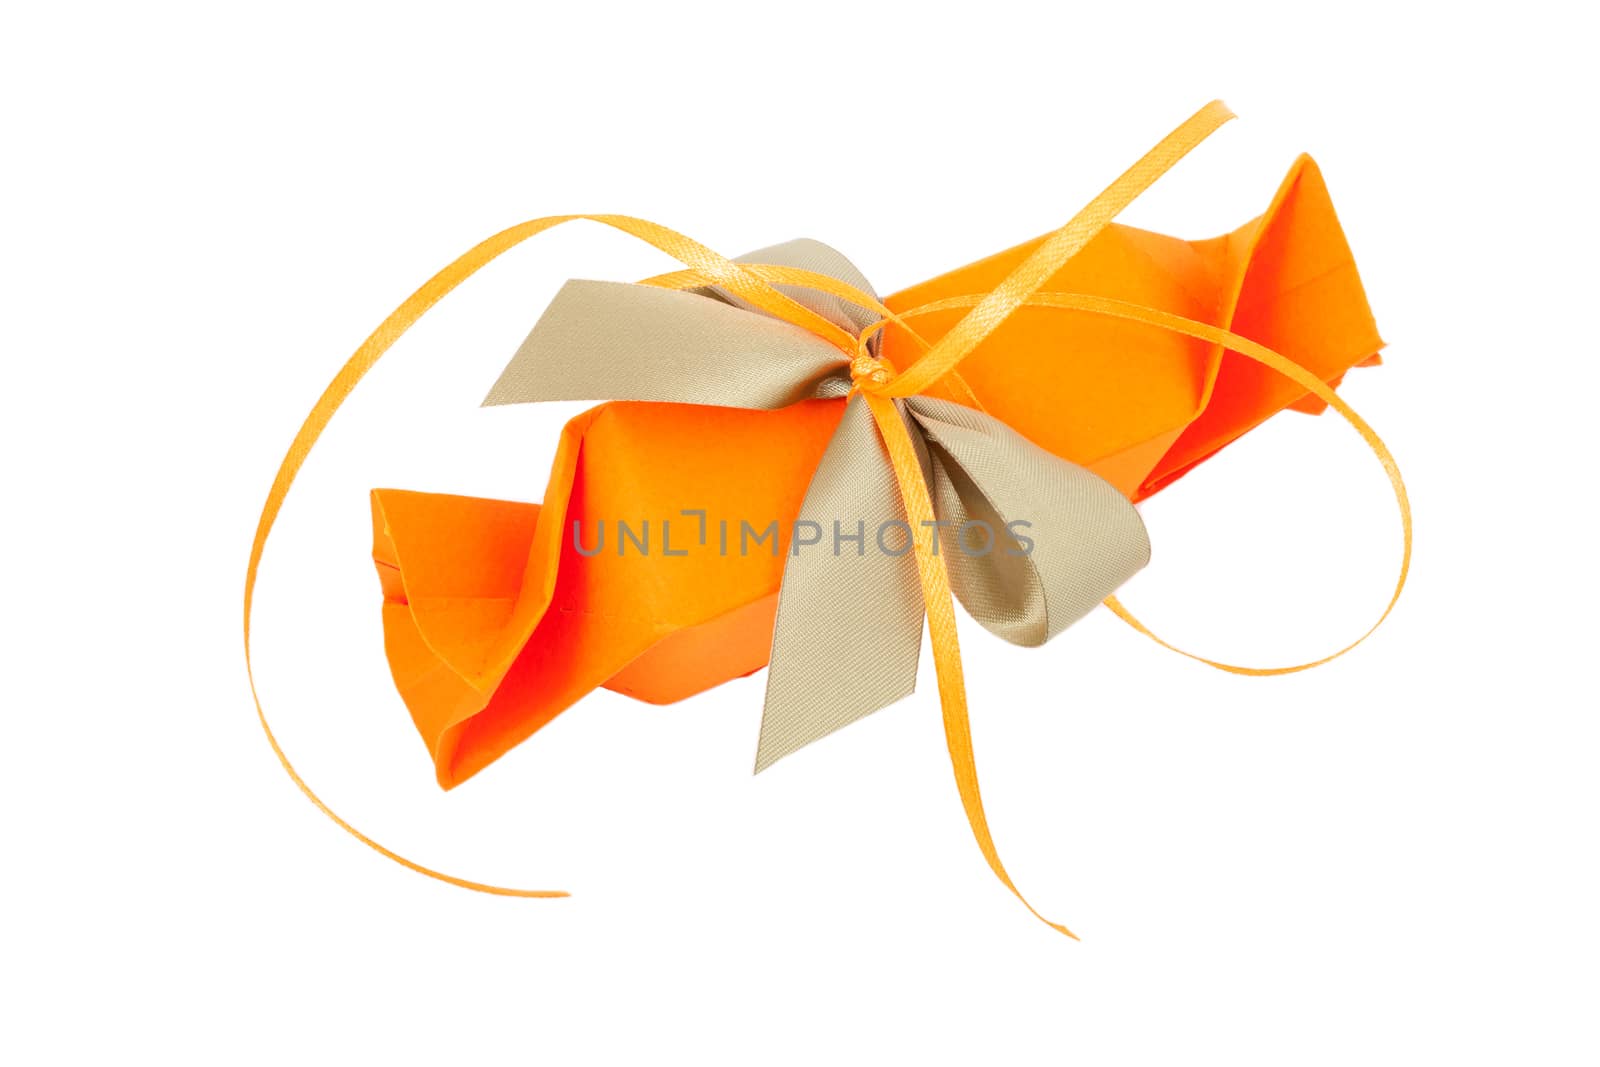 Luxury gift box with satin ribbon and bow isolated over white background.